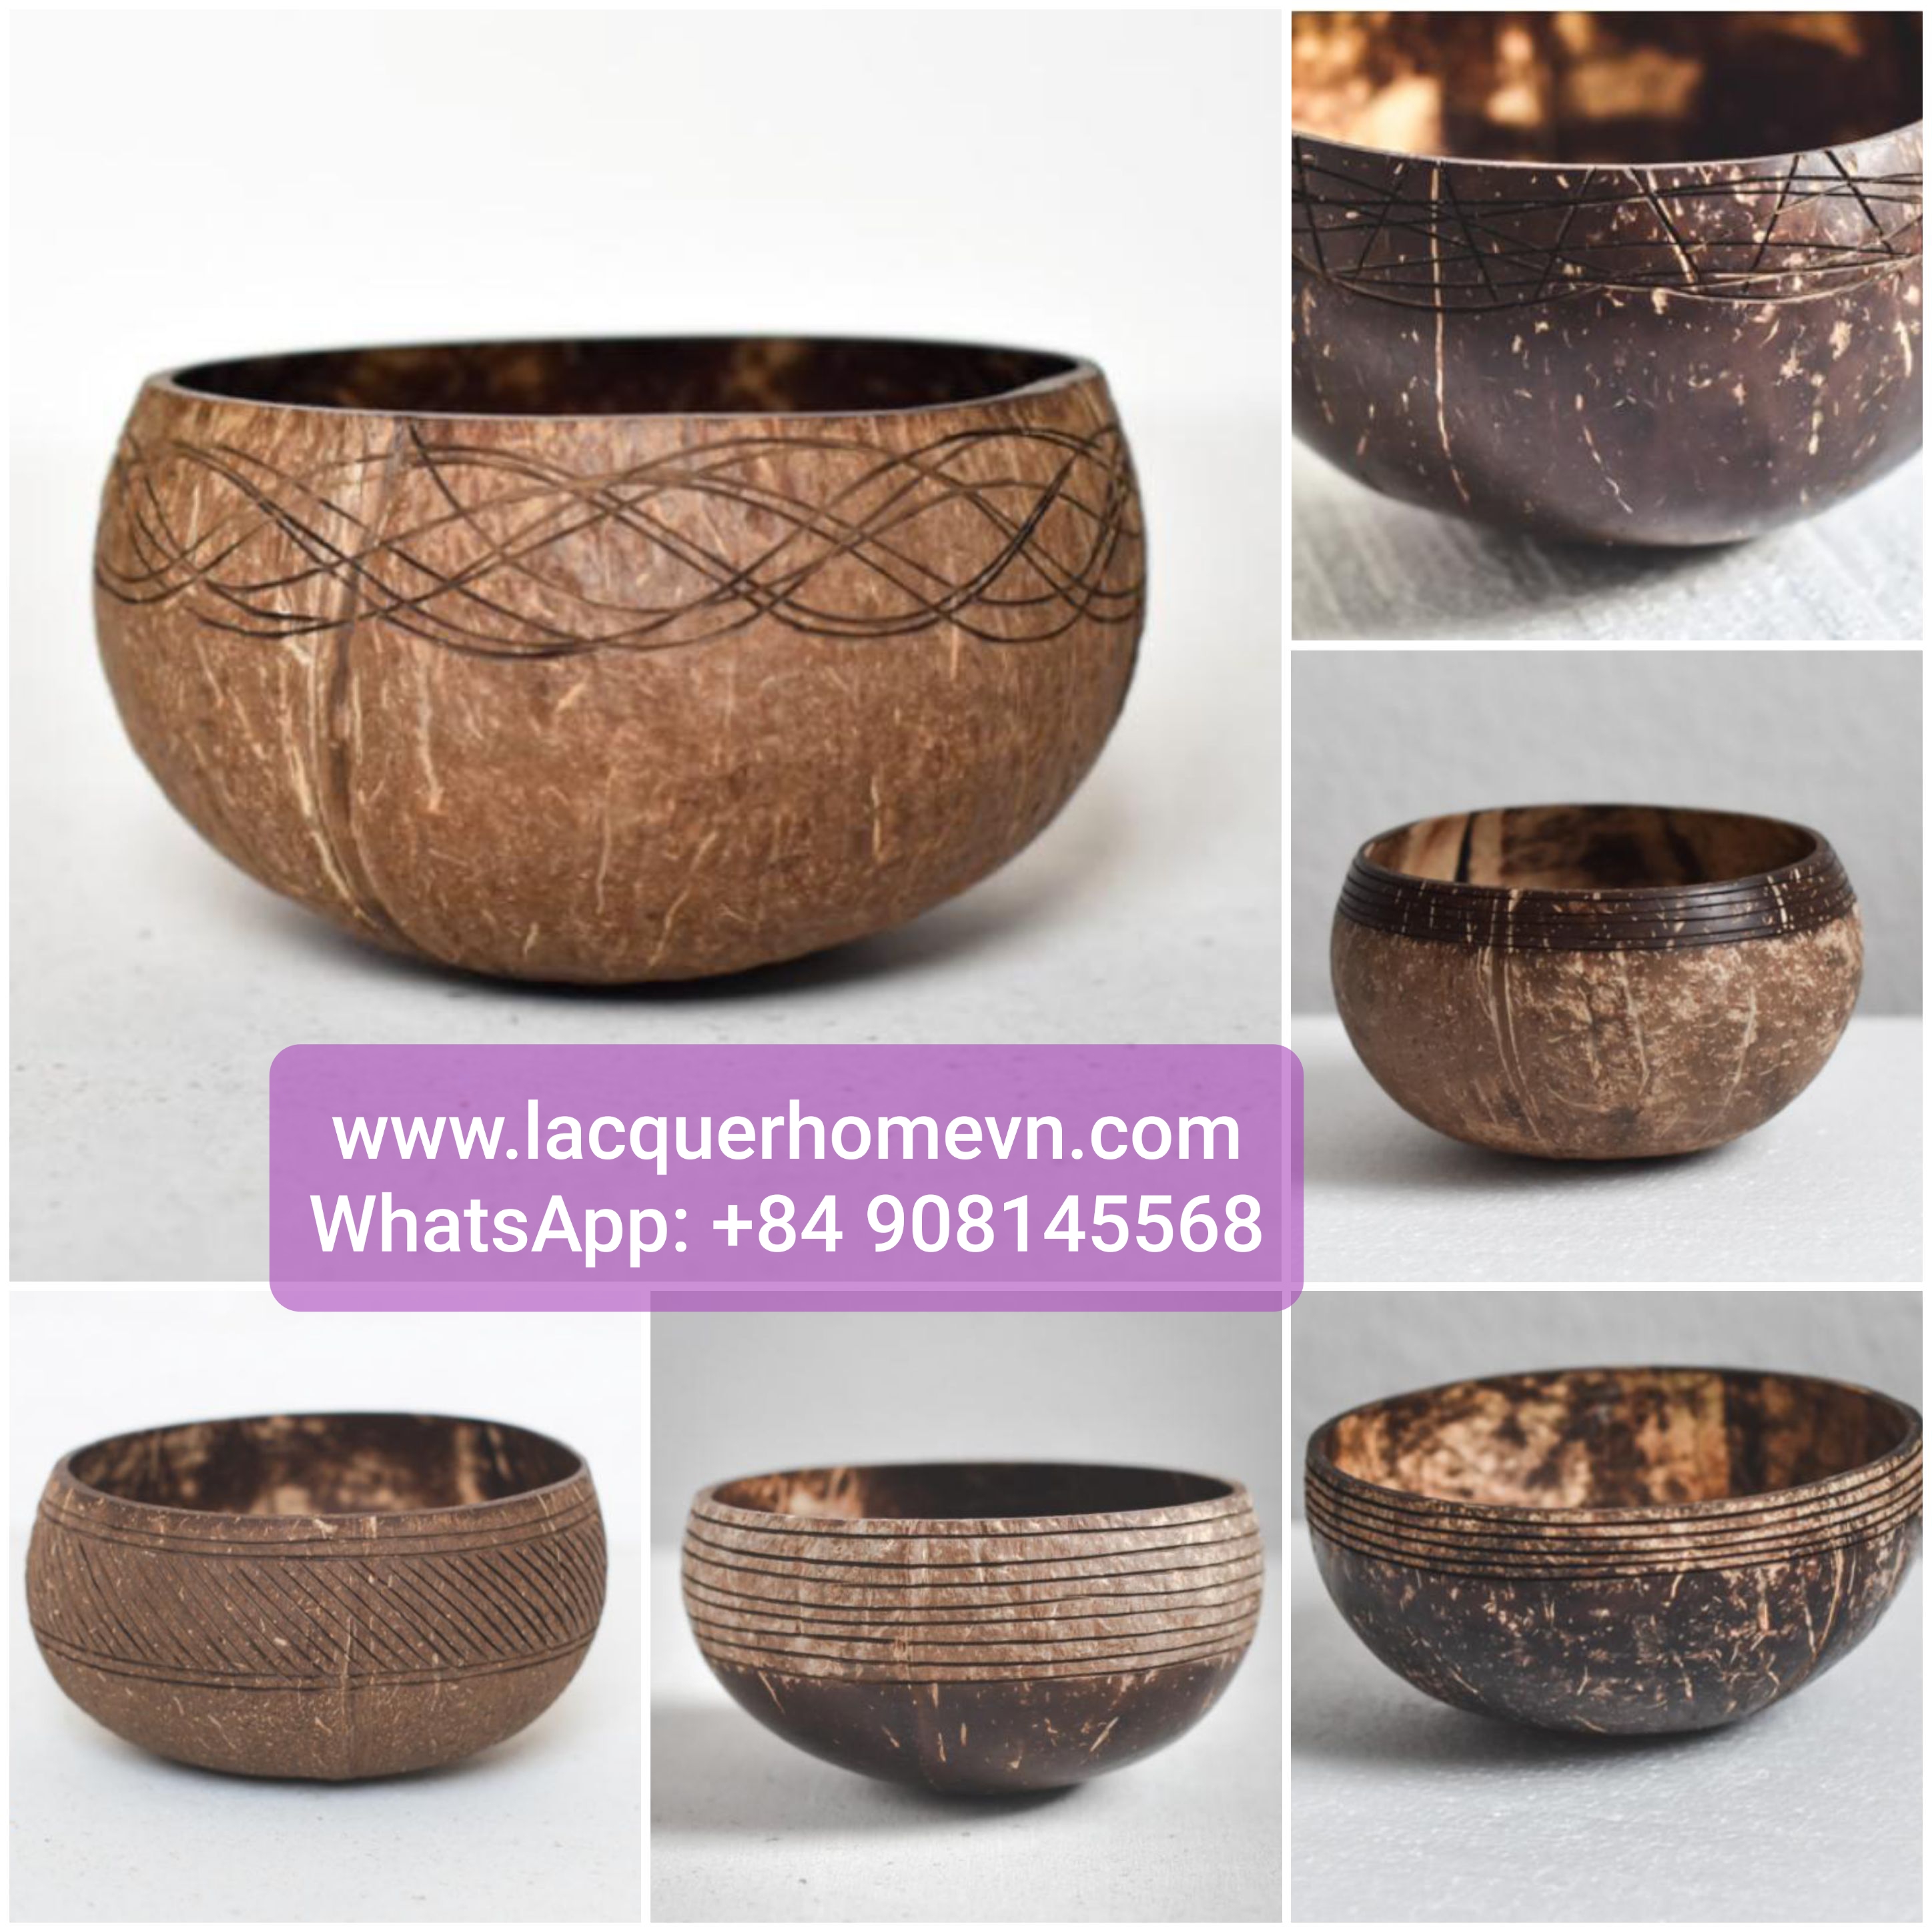 fruits and seeds Natural 100% Handmade Coconut Shell Bowl for dessert 